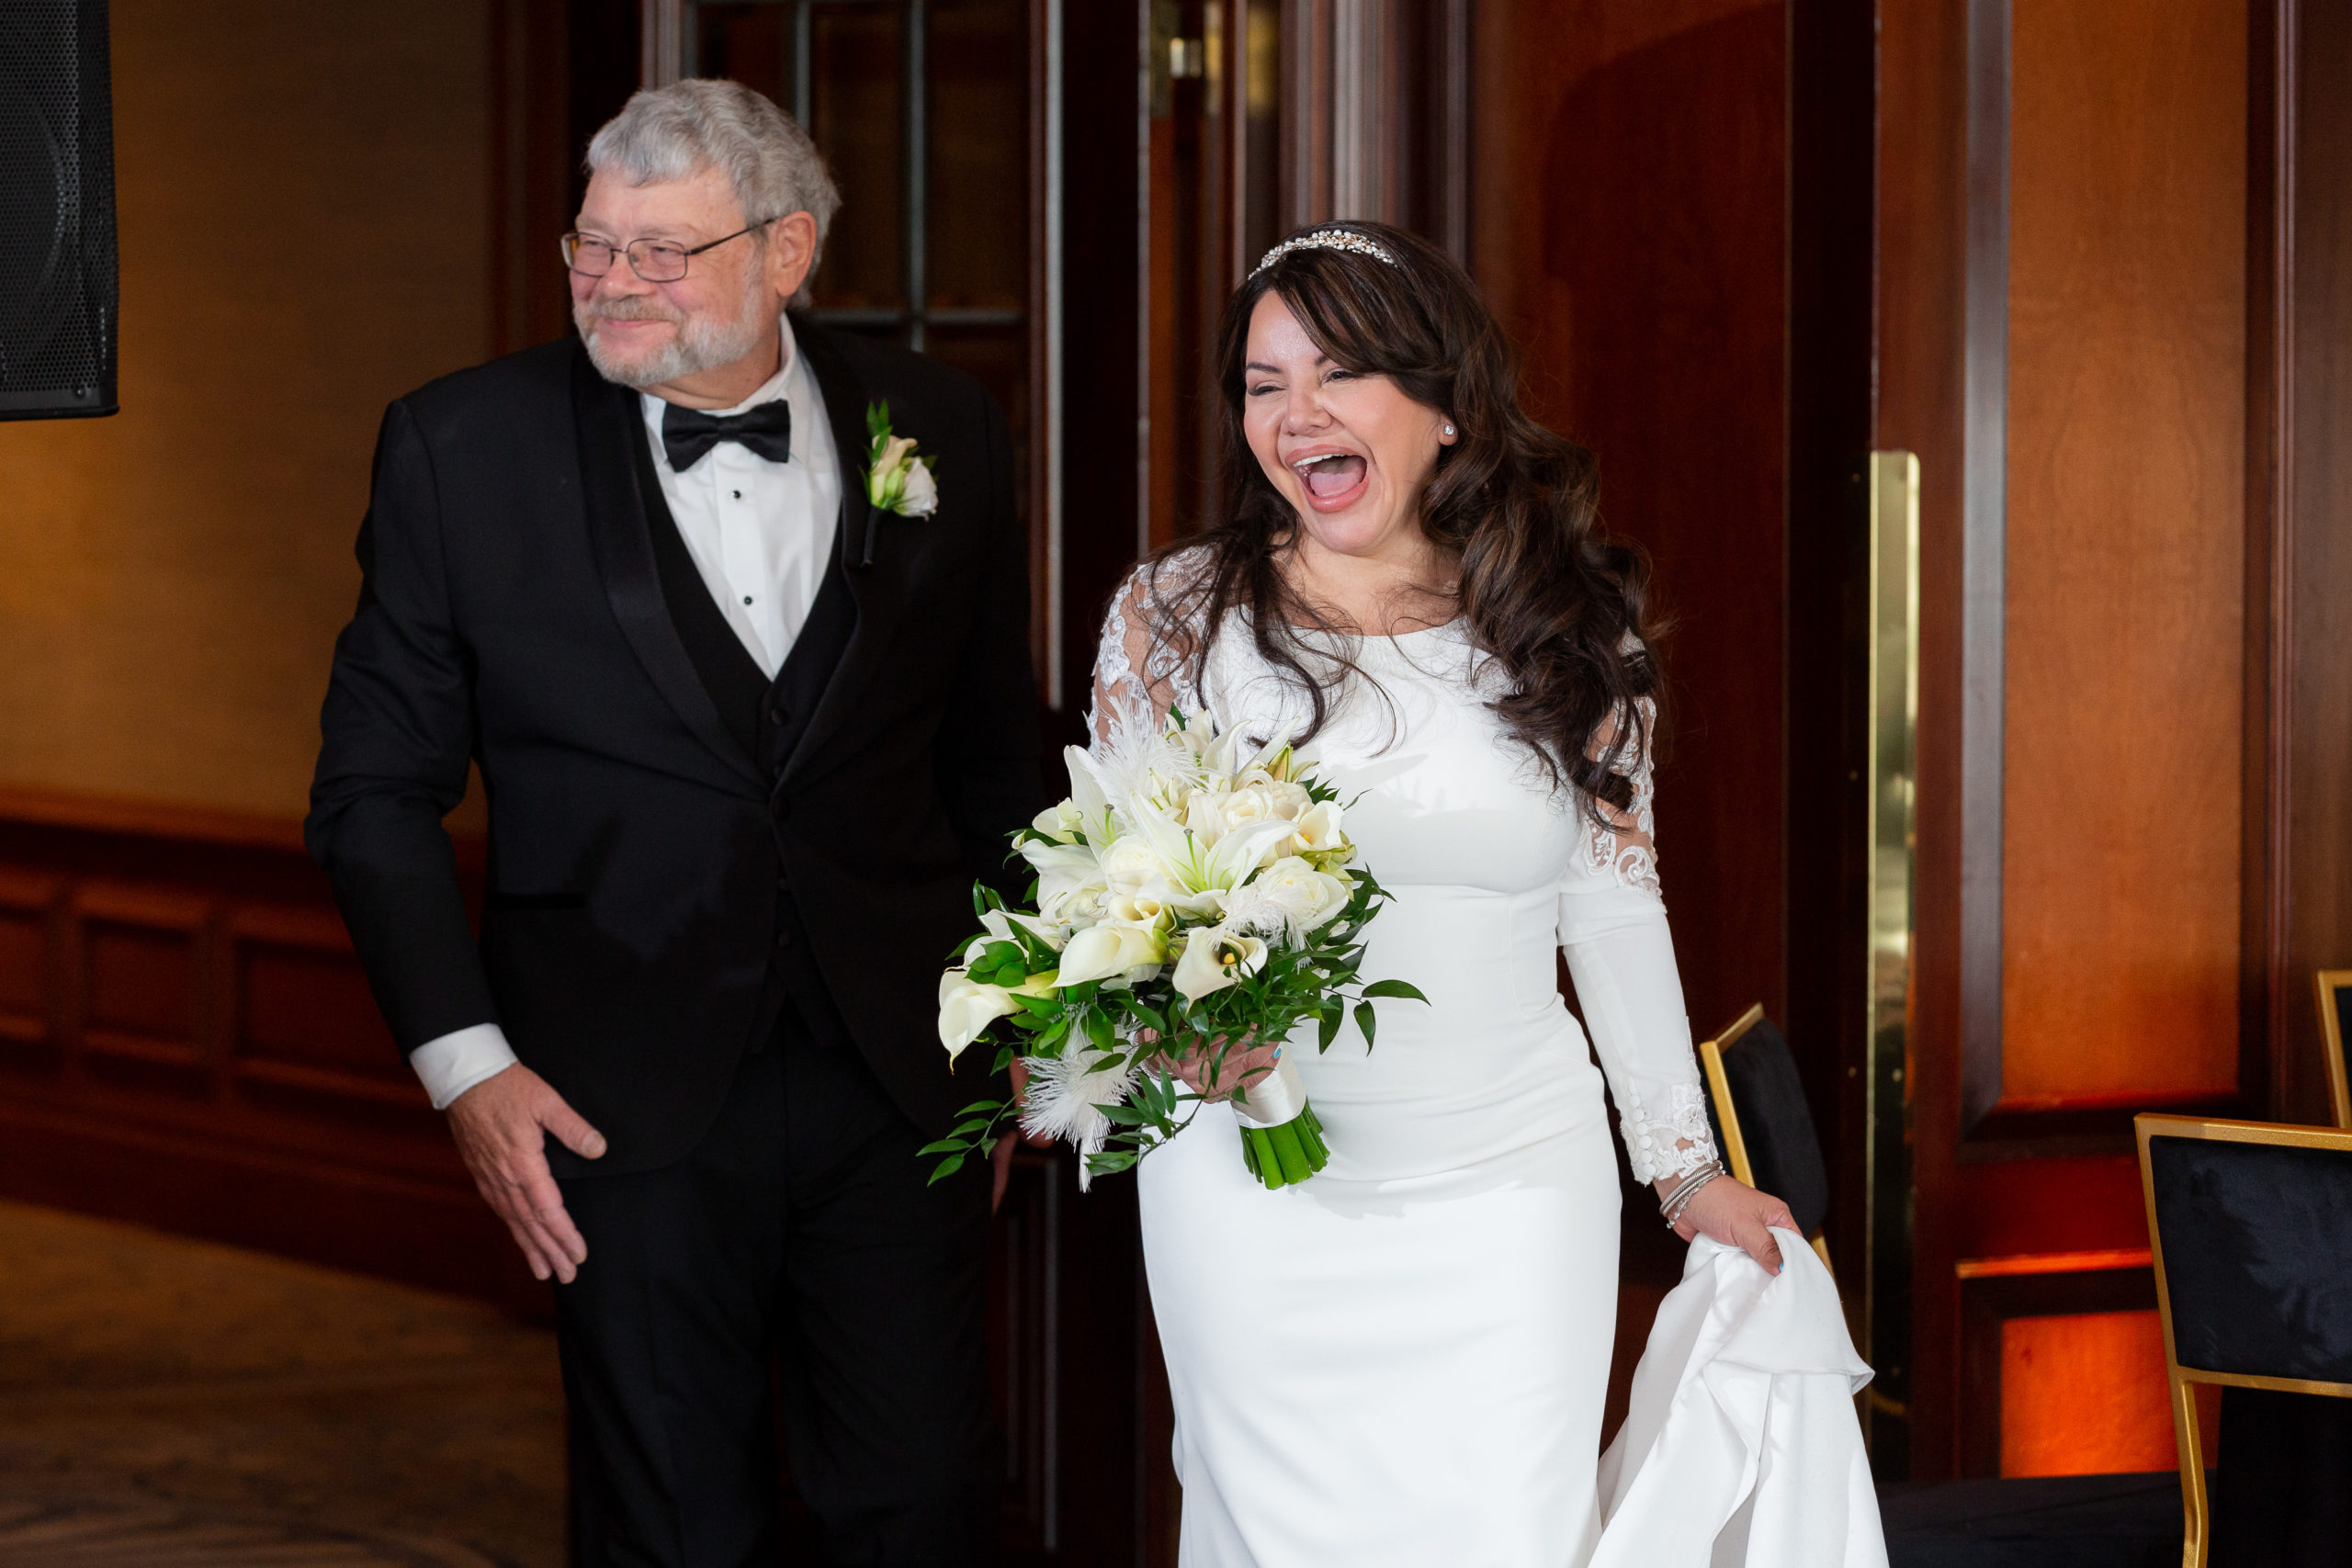 bride and groom entering their wedding reception while laughing together and celebrating with their guests captured by Dallas wedding photographer